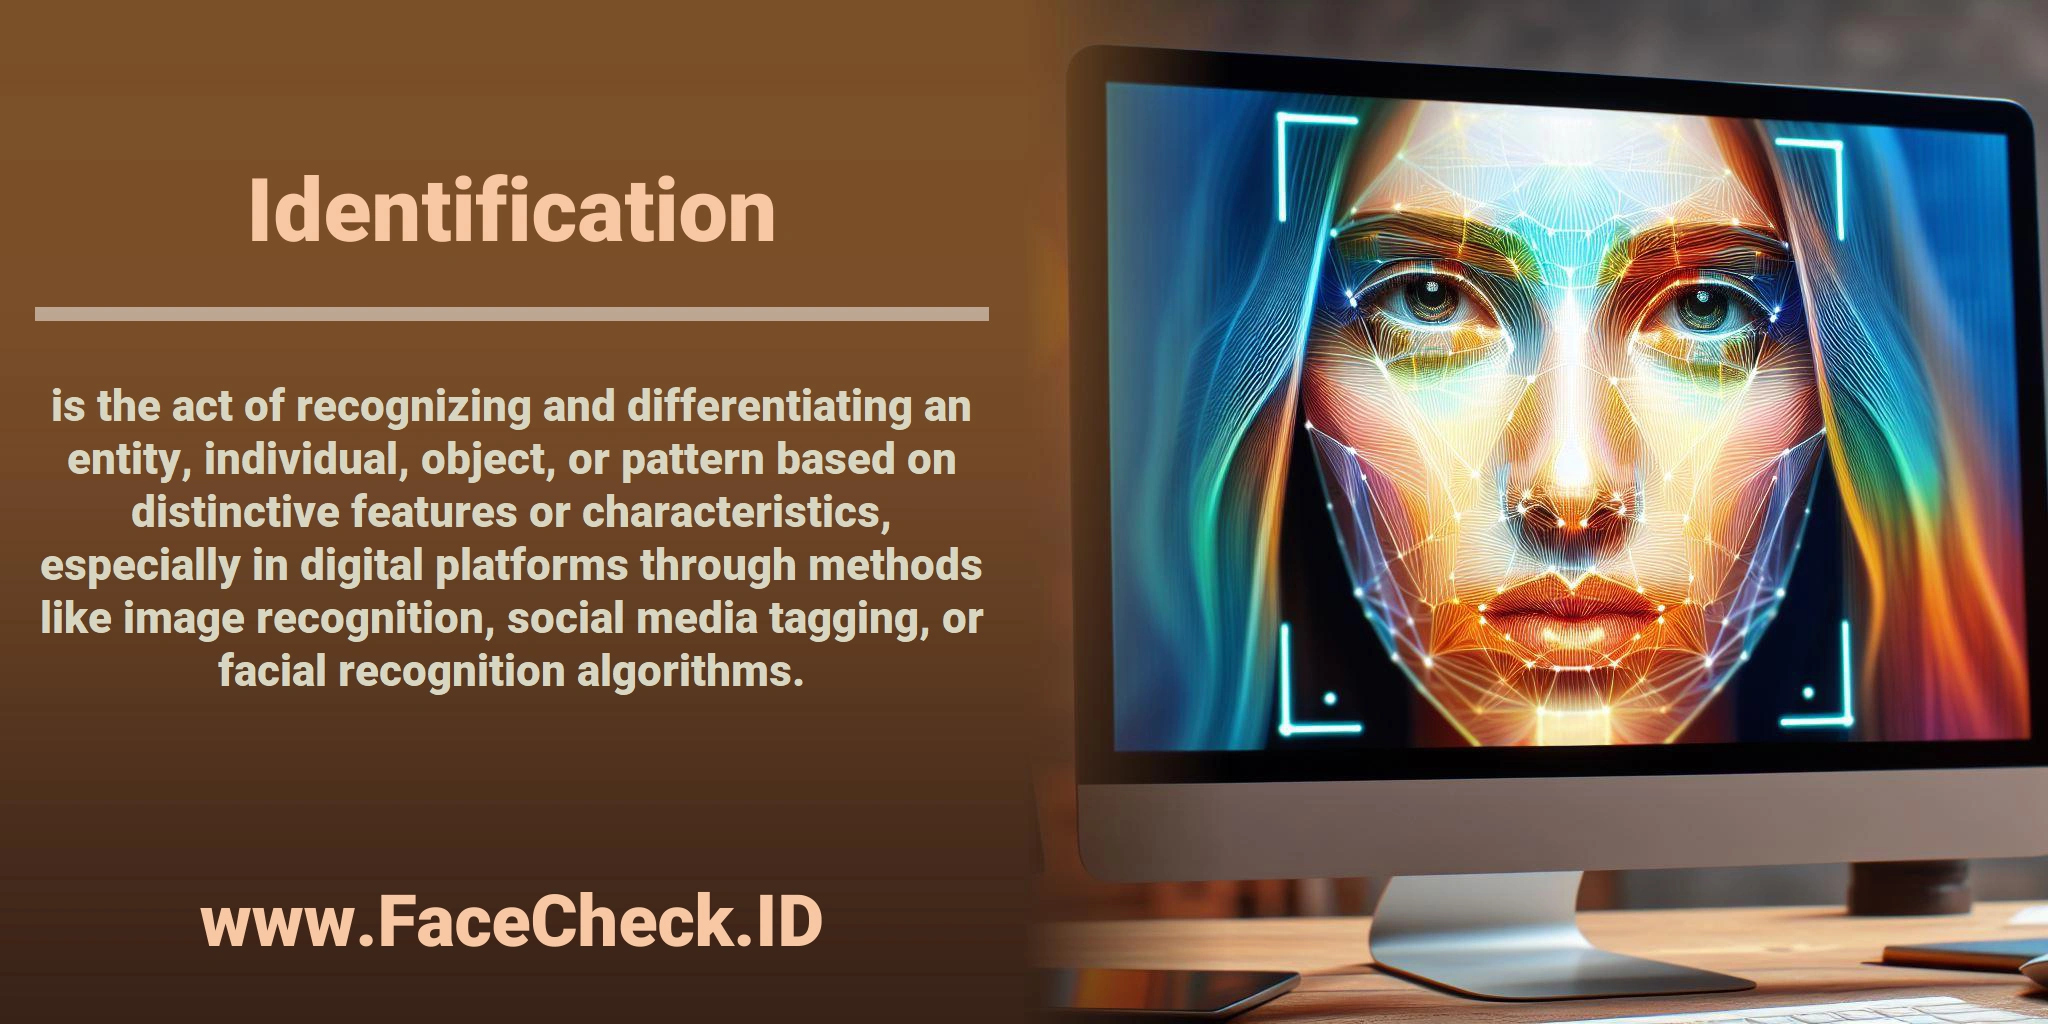 <b>Identification</b> is the act of recognizing and differentiating an entity, individual, object, or pattern based on distinctive features or characteristics, especially in digital platforms through methods like image recognition, social media tagging, or facial recognition algorithms.